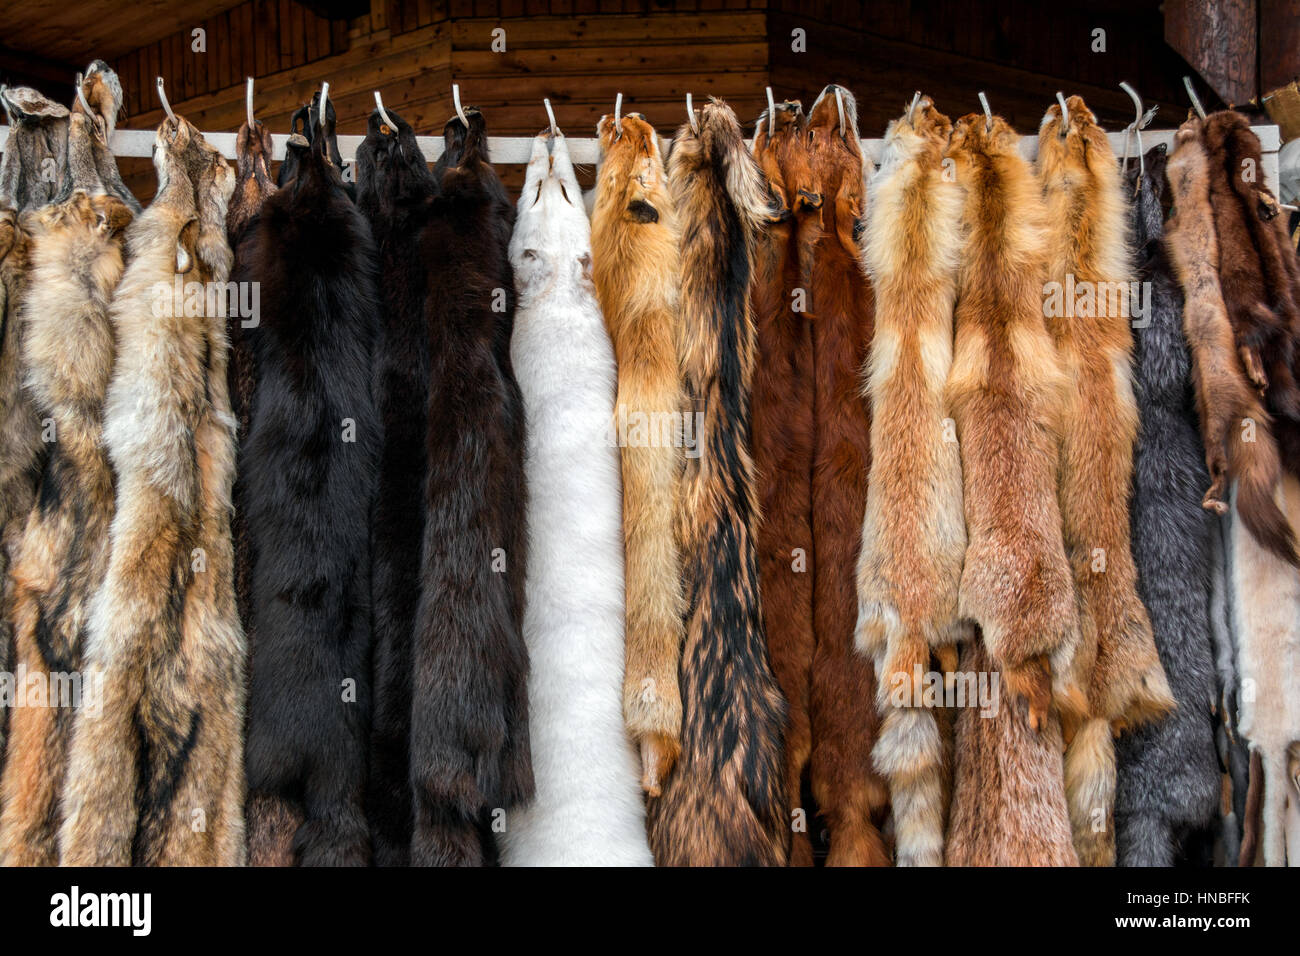 tanned hides for sale